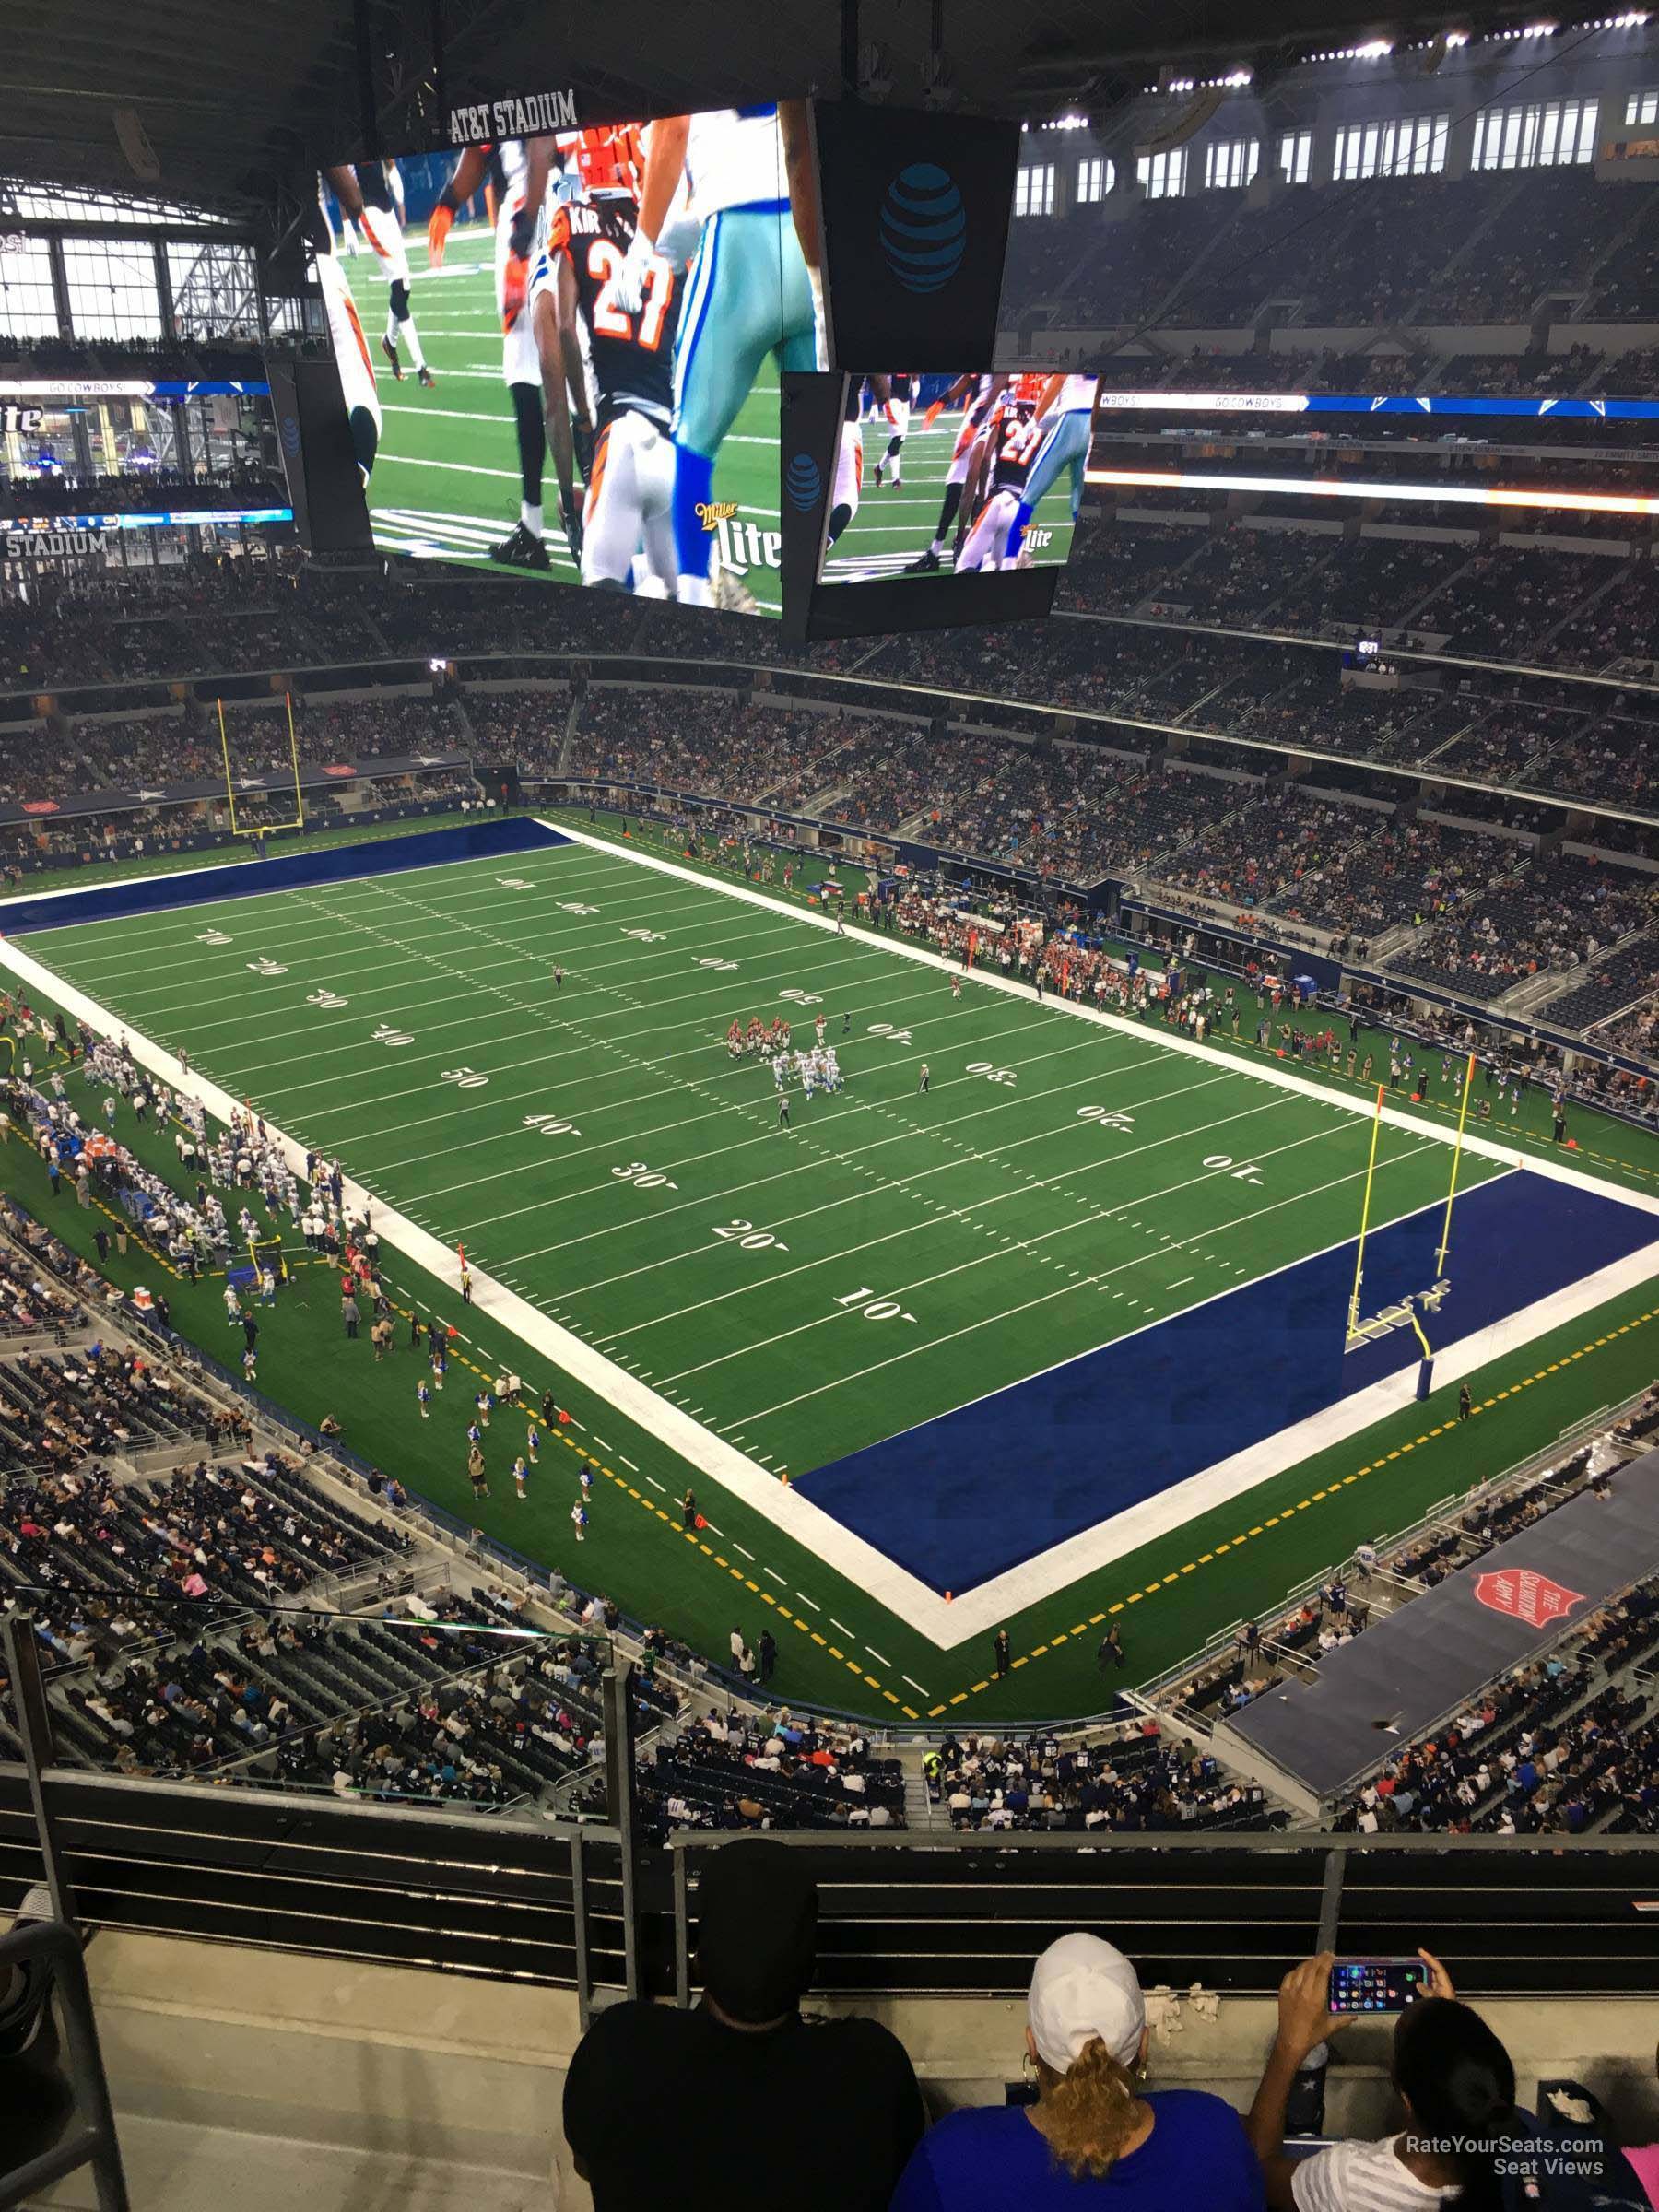 section 404, row 4 seat view  for football - at&t stadium (cowboys stadium)